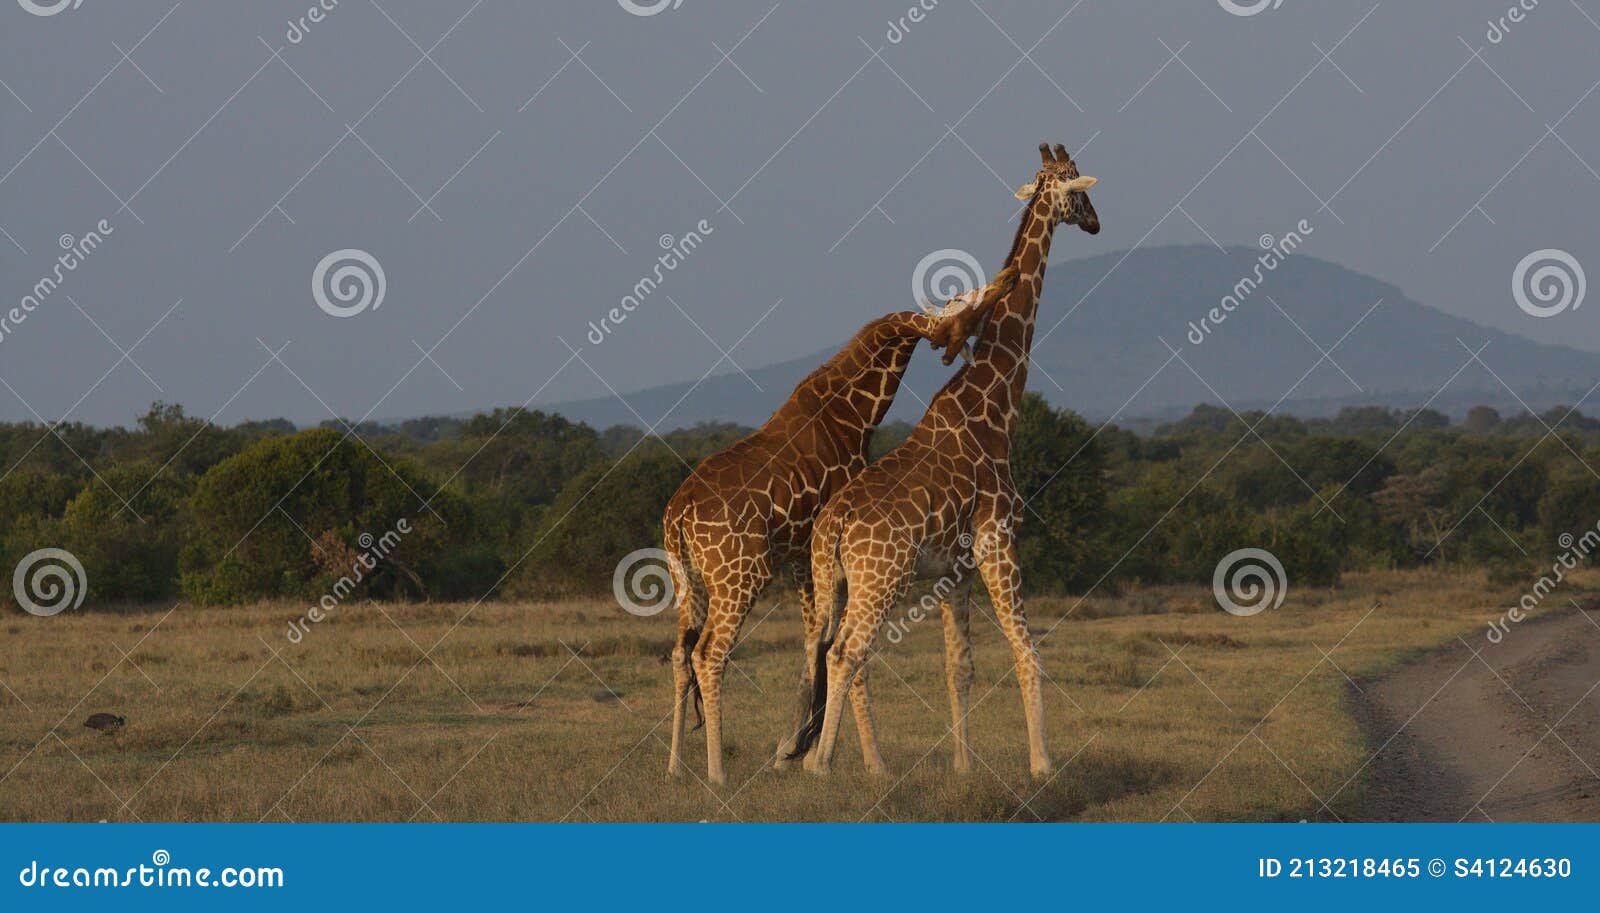 a pair of reticulated giraffes engaging in necking ritual in the wild, kenya